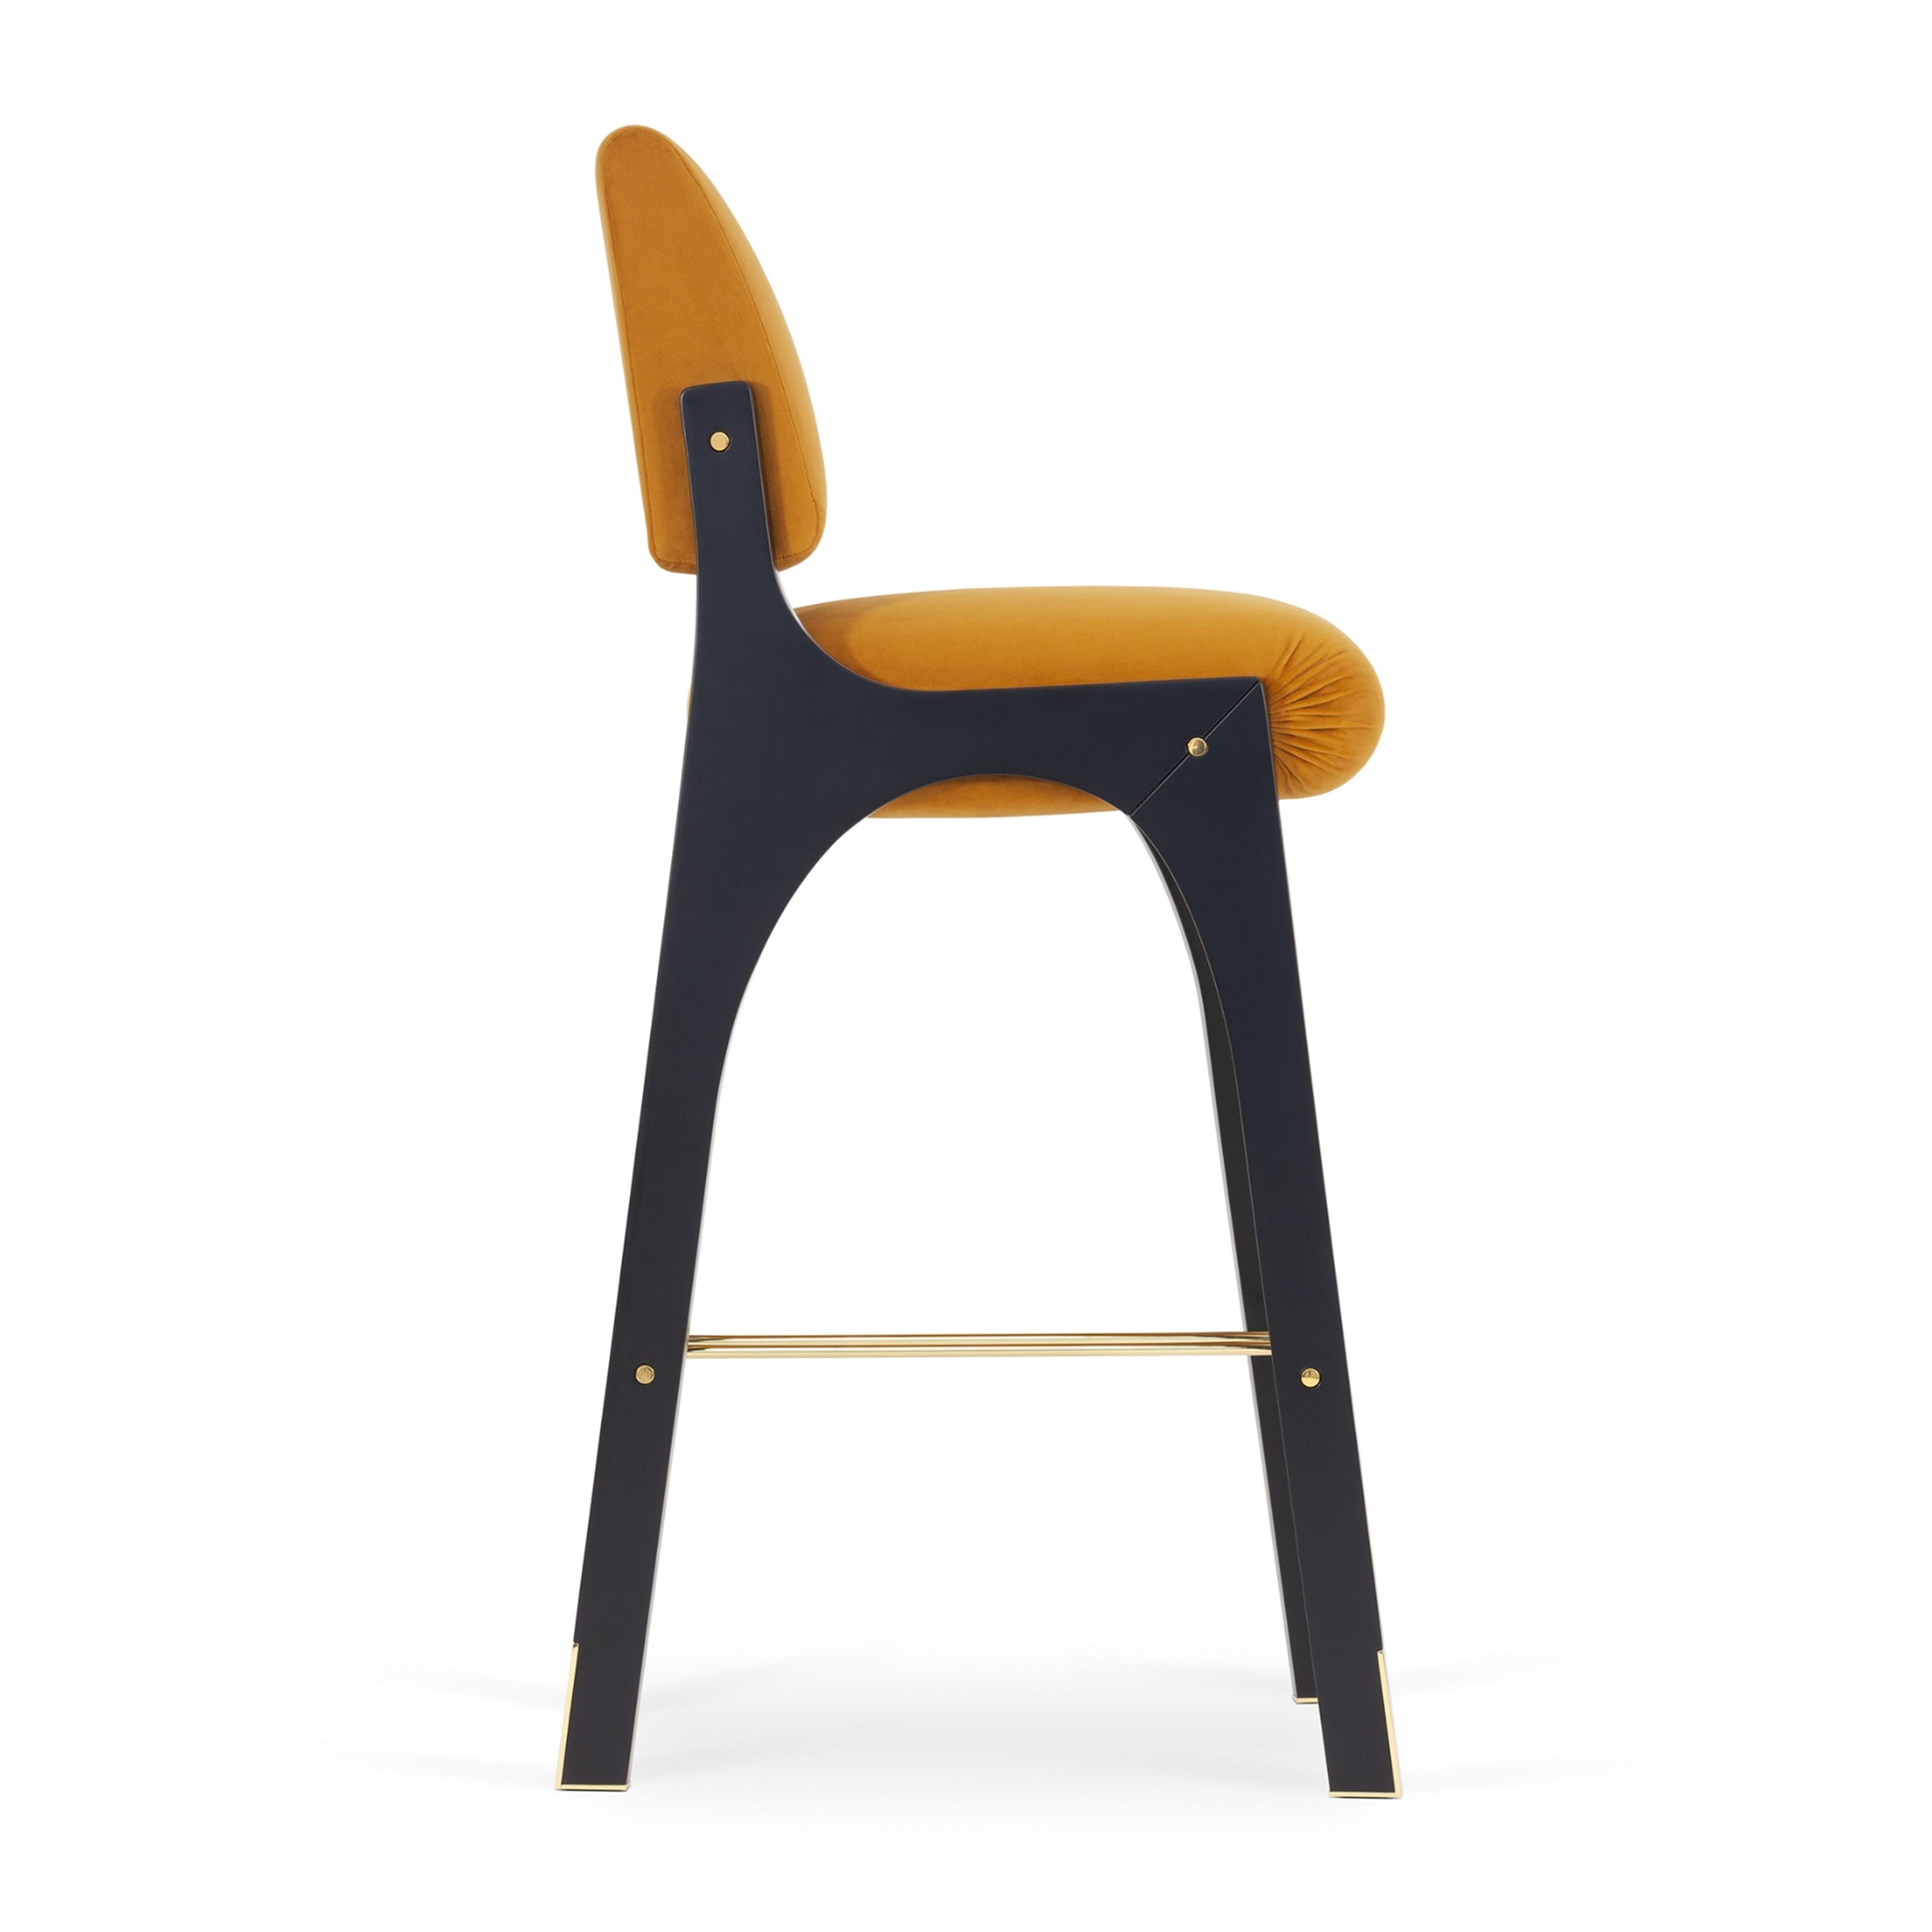 The Arches II counter stool is designed in the likeness of the architectural scale that suggests a crossing through the structures of a utopian city, organized by the principles of symmetry and ideal forms.

The Arches II counter stool is a